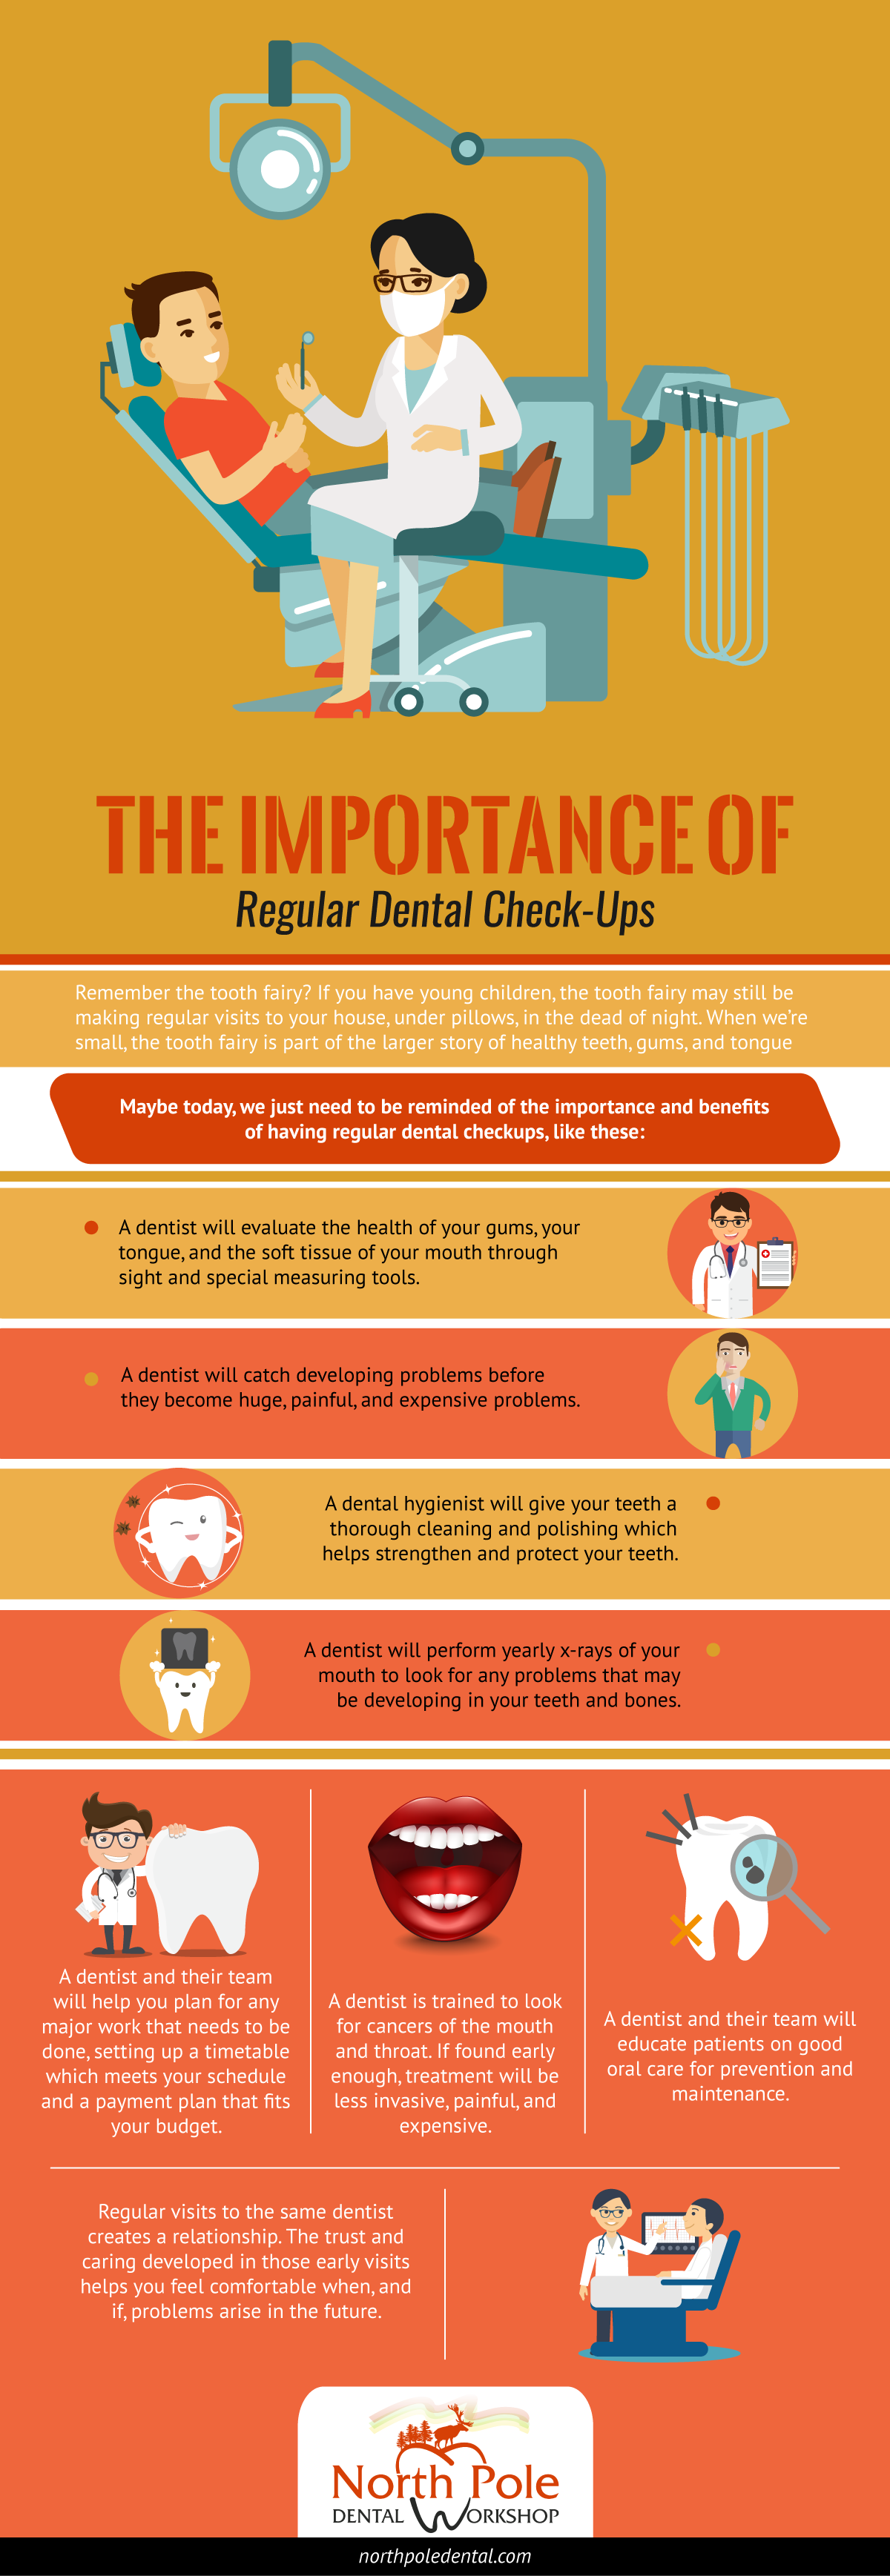 The Importance of Regular Dental Checkups and Teeth Cleanings